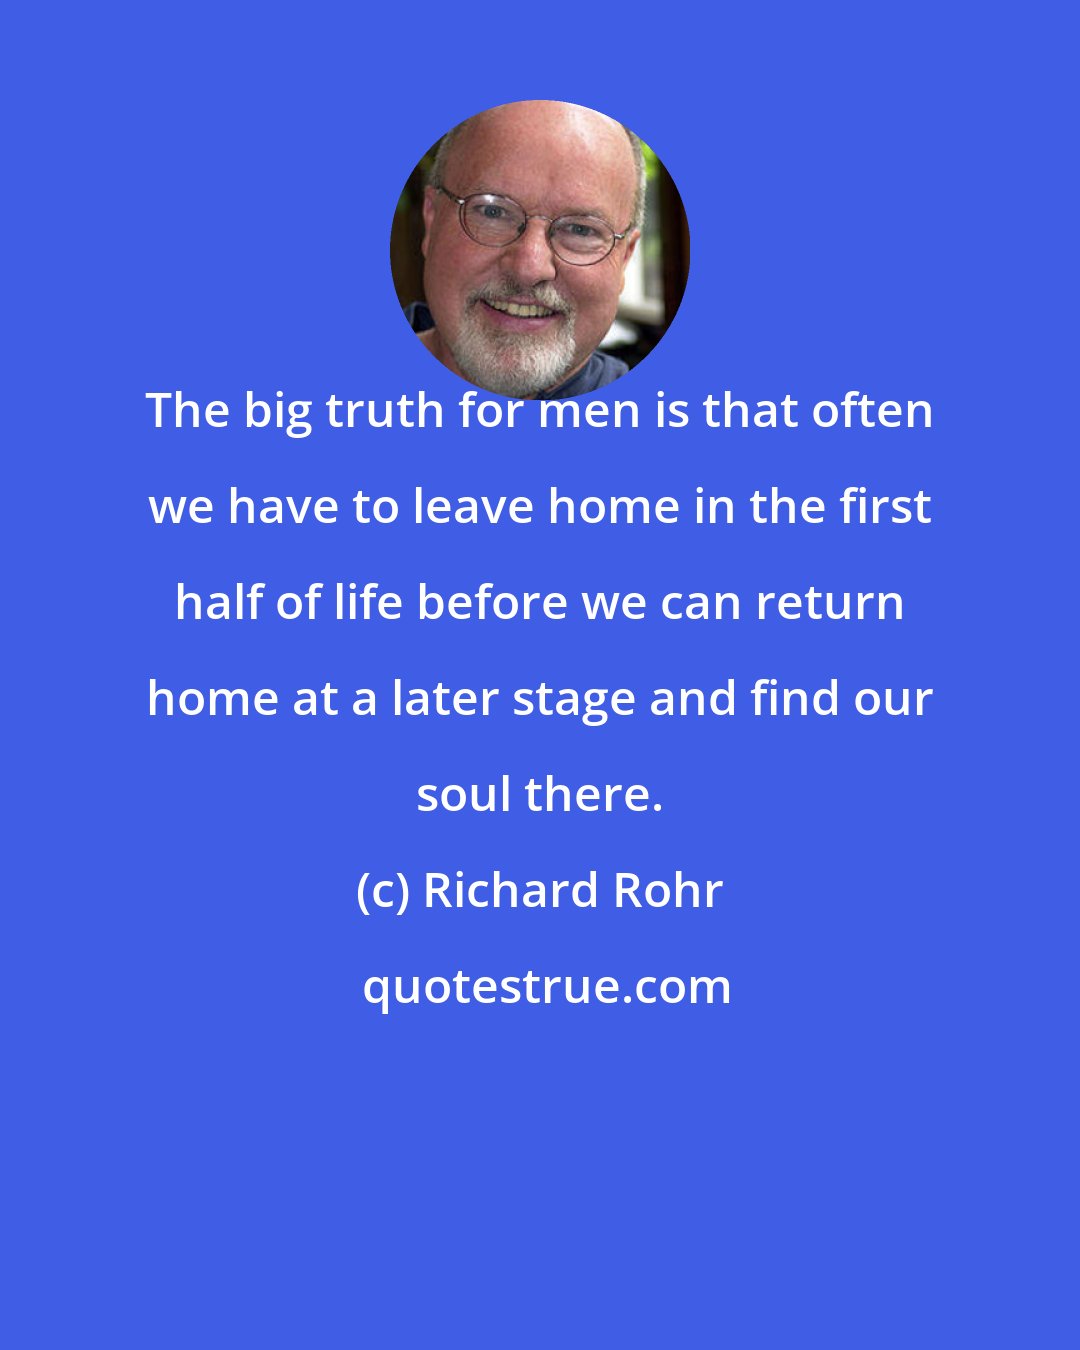 Richard Rohr: The big truth for men is that often we have to leave home in the first half of life before we can return home at a later stage and find our soul there.